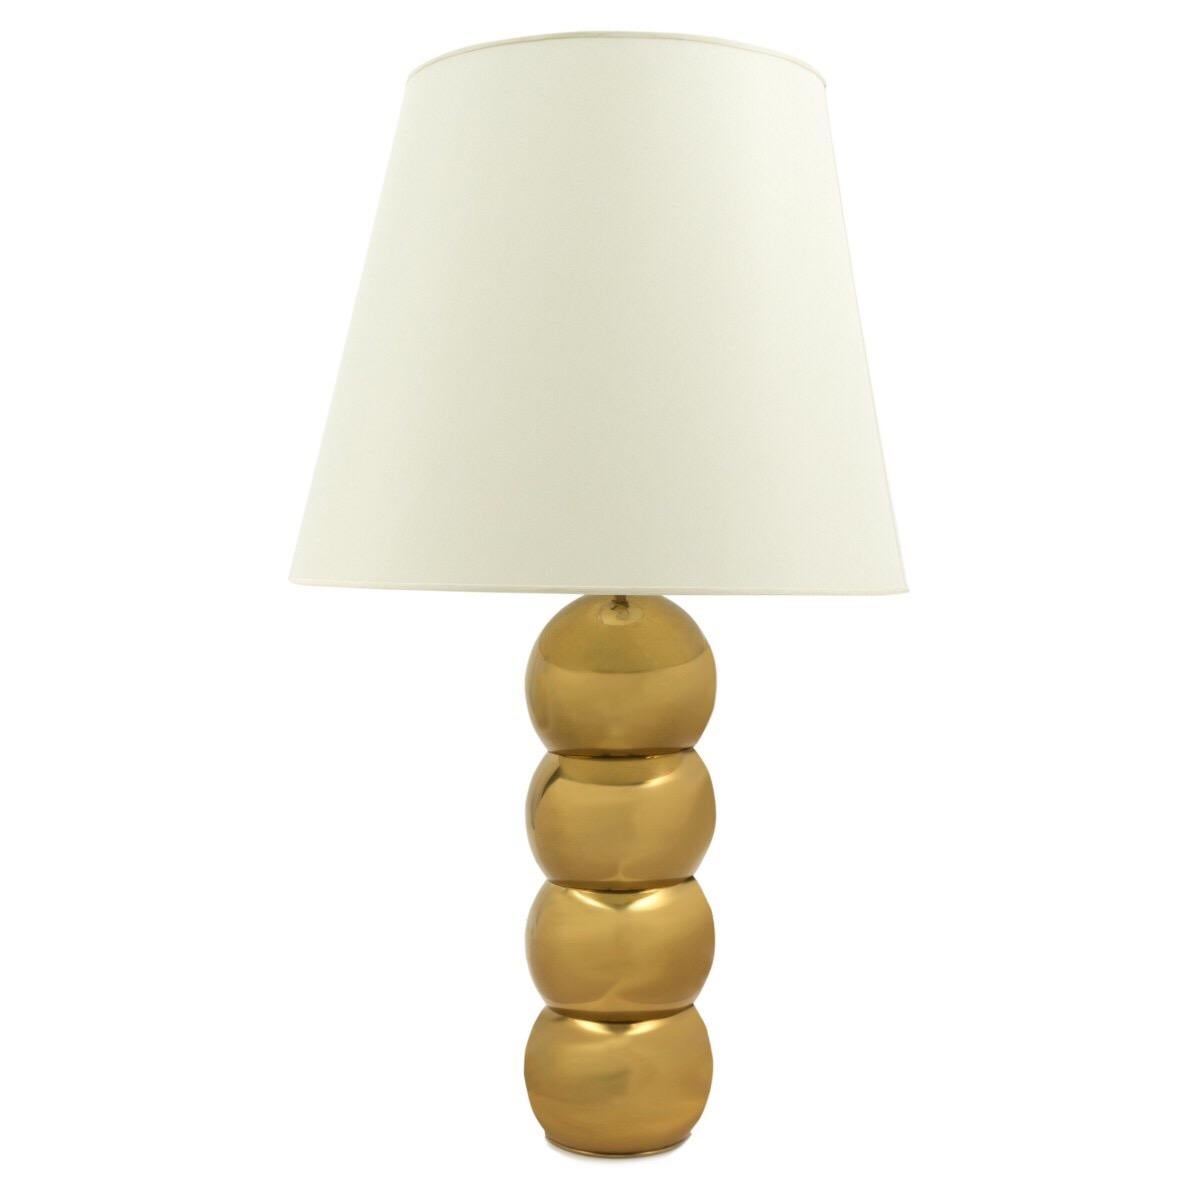 A pair of table lamps with a stacked ball design in bronze finish. USA, circa 1970. Newly required for U.S. Includes two white paper shades as shown.

Dimensions:
7